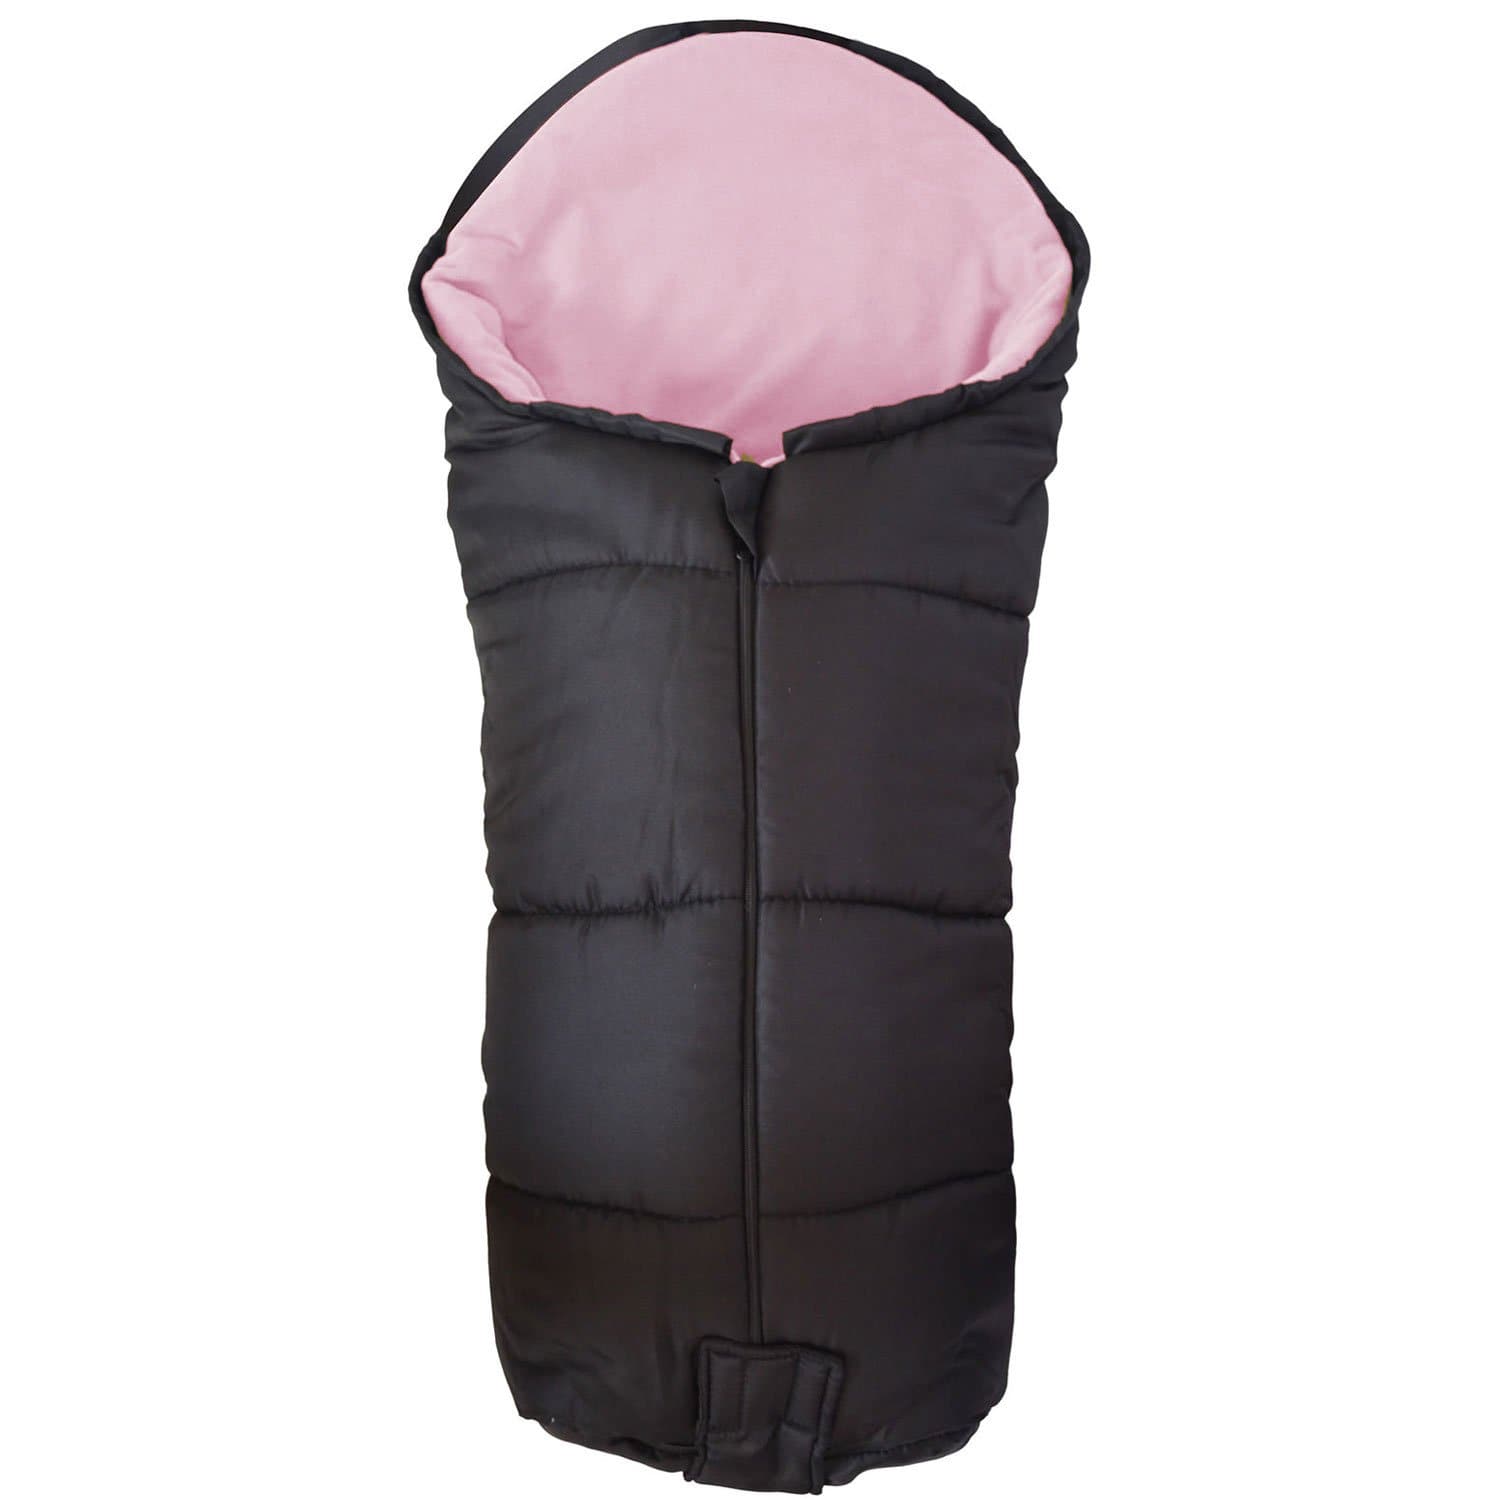 Deluxe Footmuff / Cosy Toes Compatible with Kiddicouture - Light Pink / Fits All Models | For Your Little One